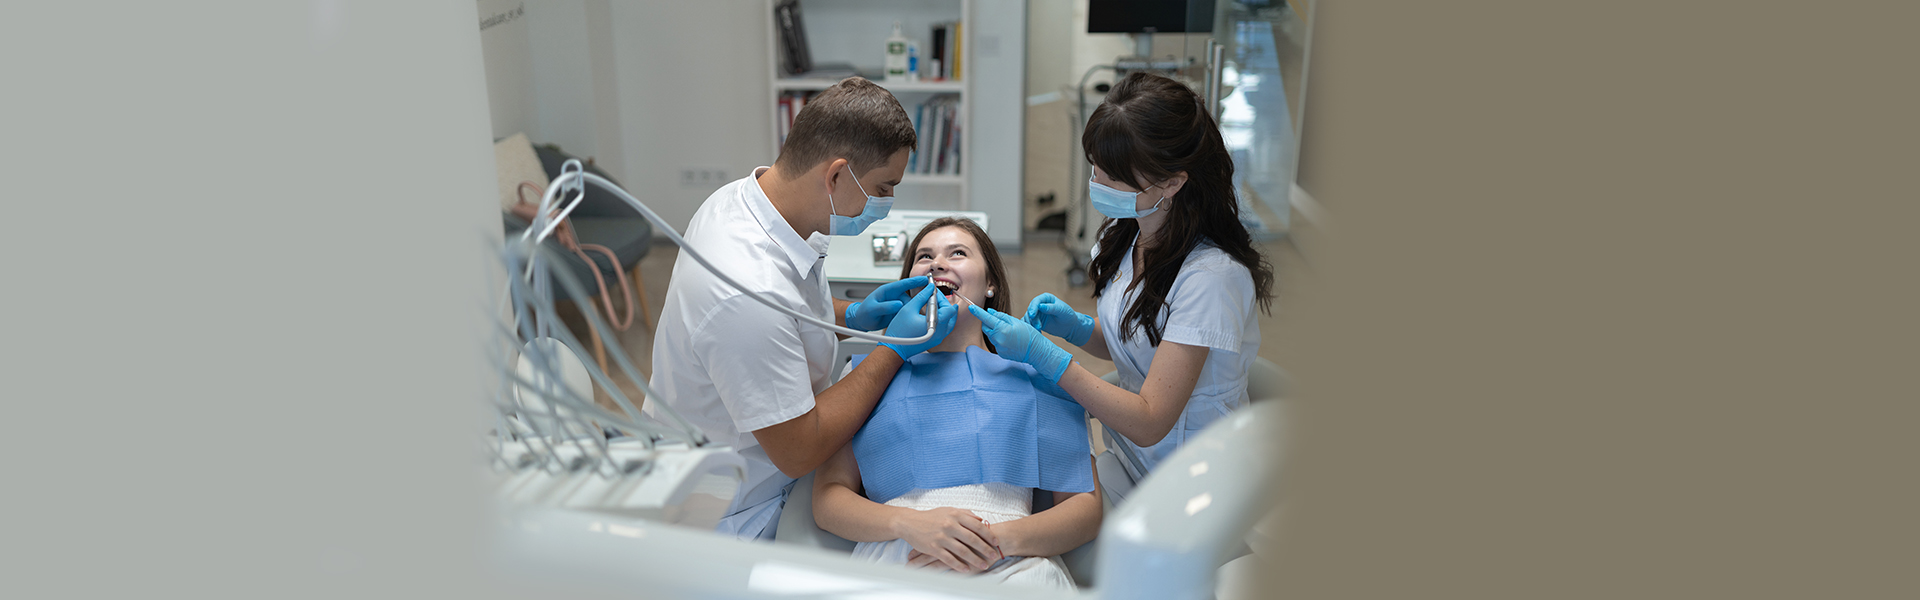 How Effective Is Periodontal Treatment?